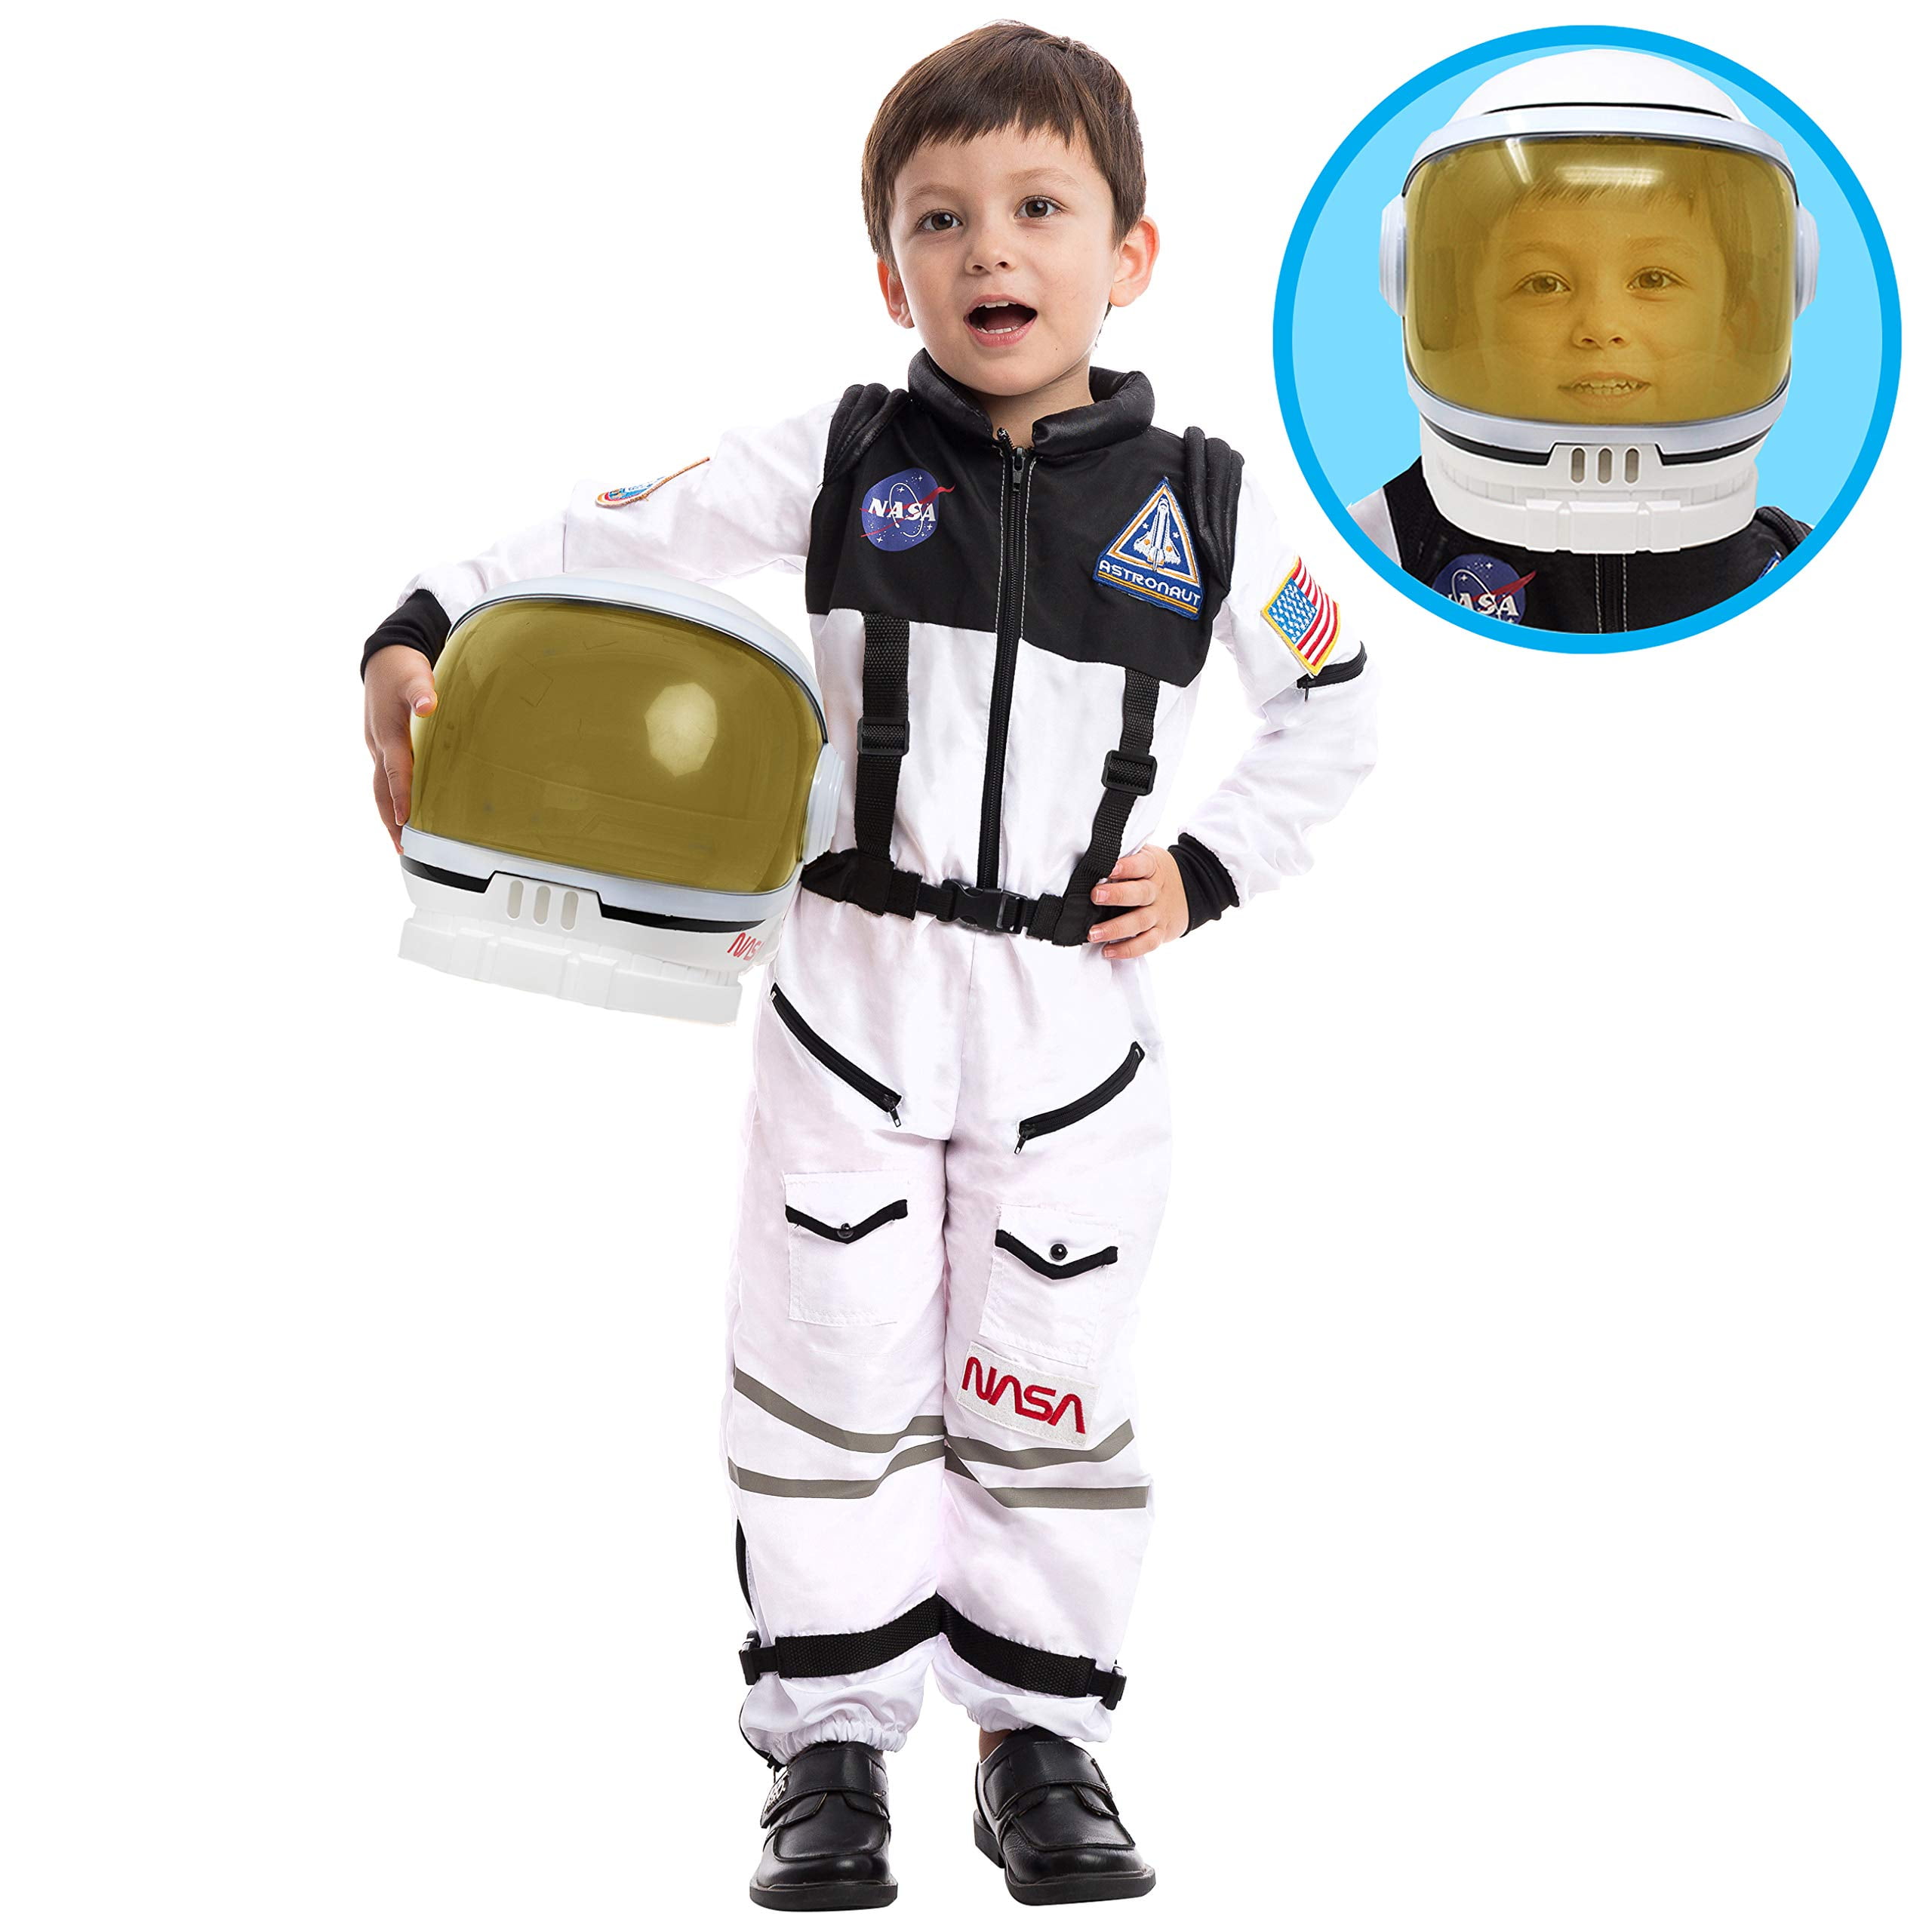 Spooktacular Creations Astronaut Costume with Helmet for Kids, Space Suit,  Space Jumpsuit for Halloween Boys Girls Pretend Role Play Dress Up  (White)-M 